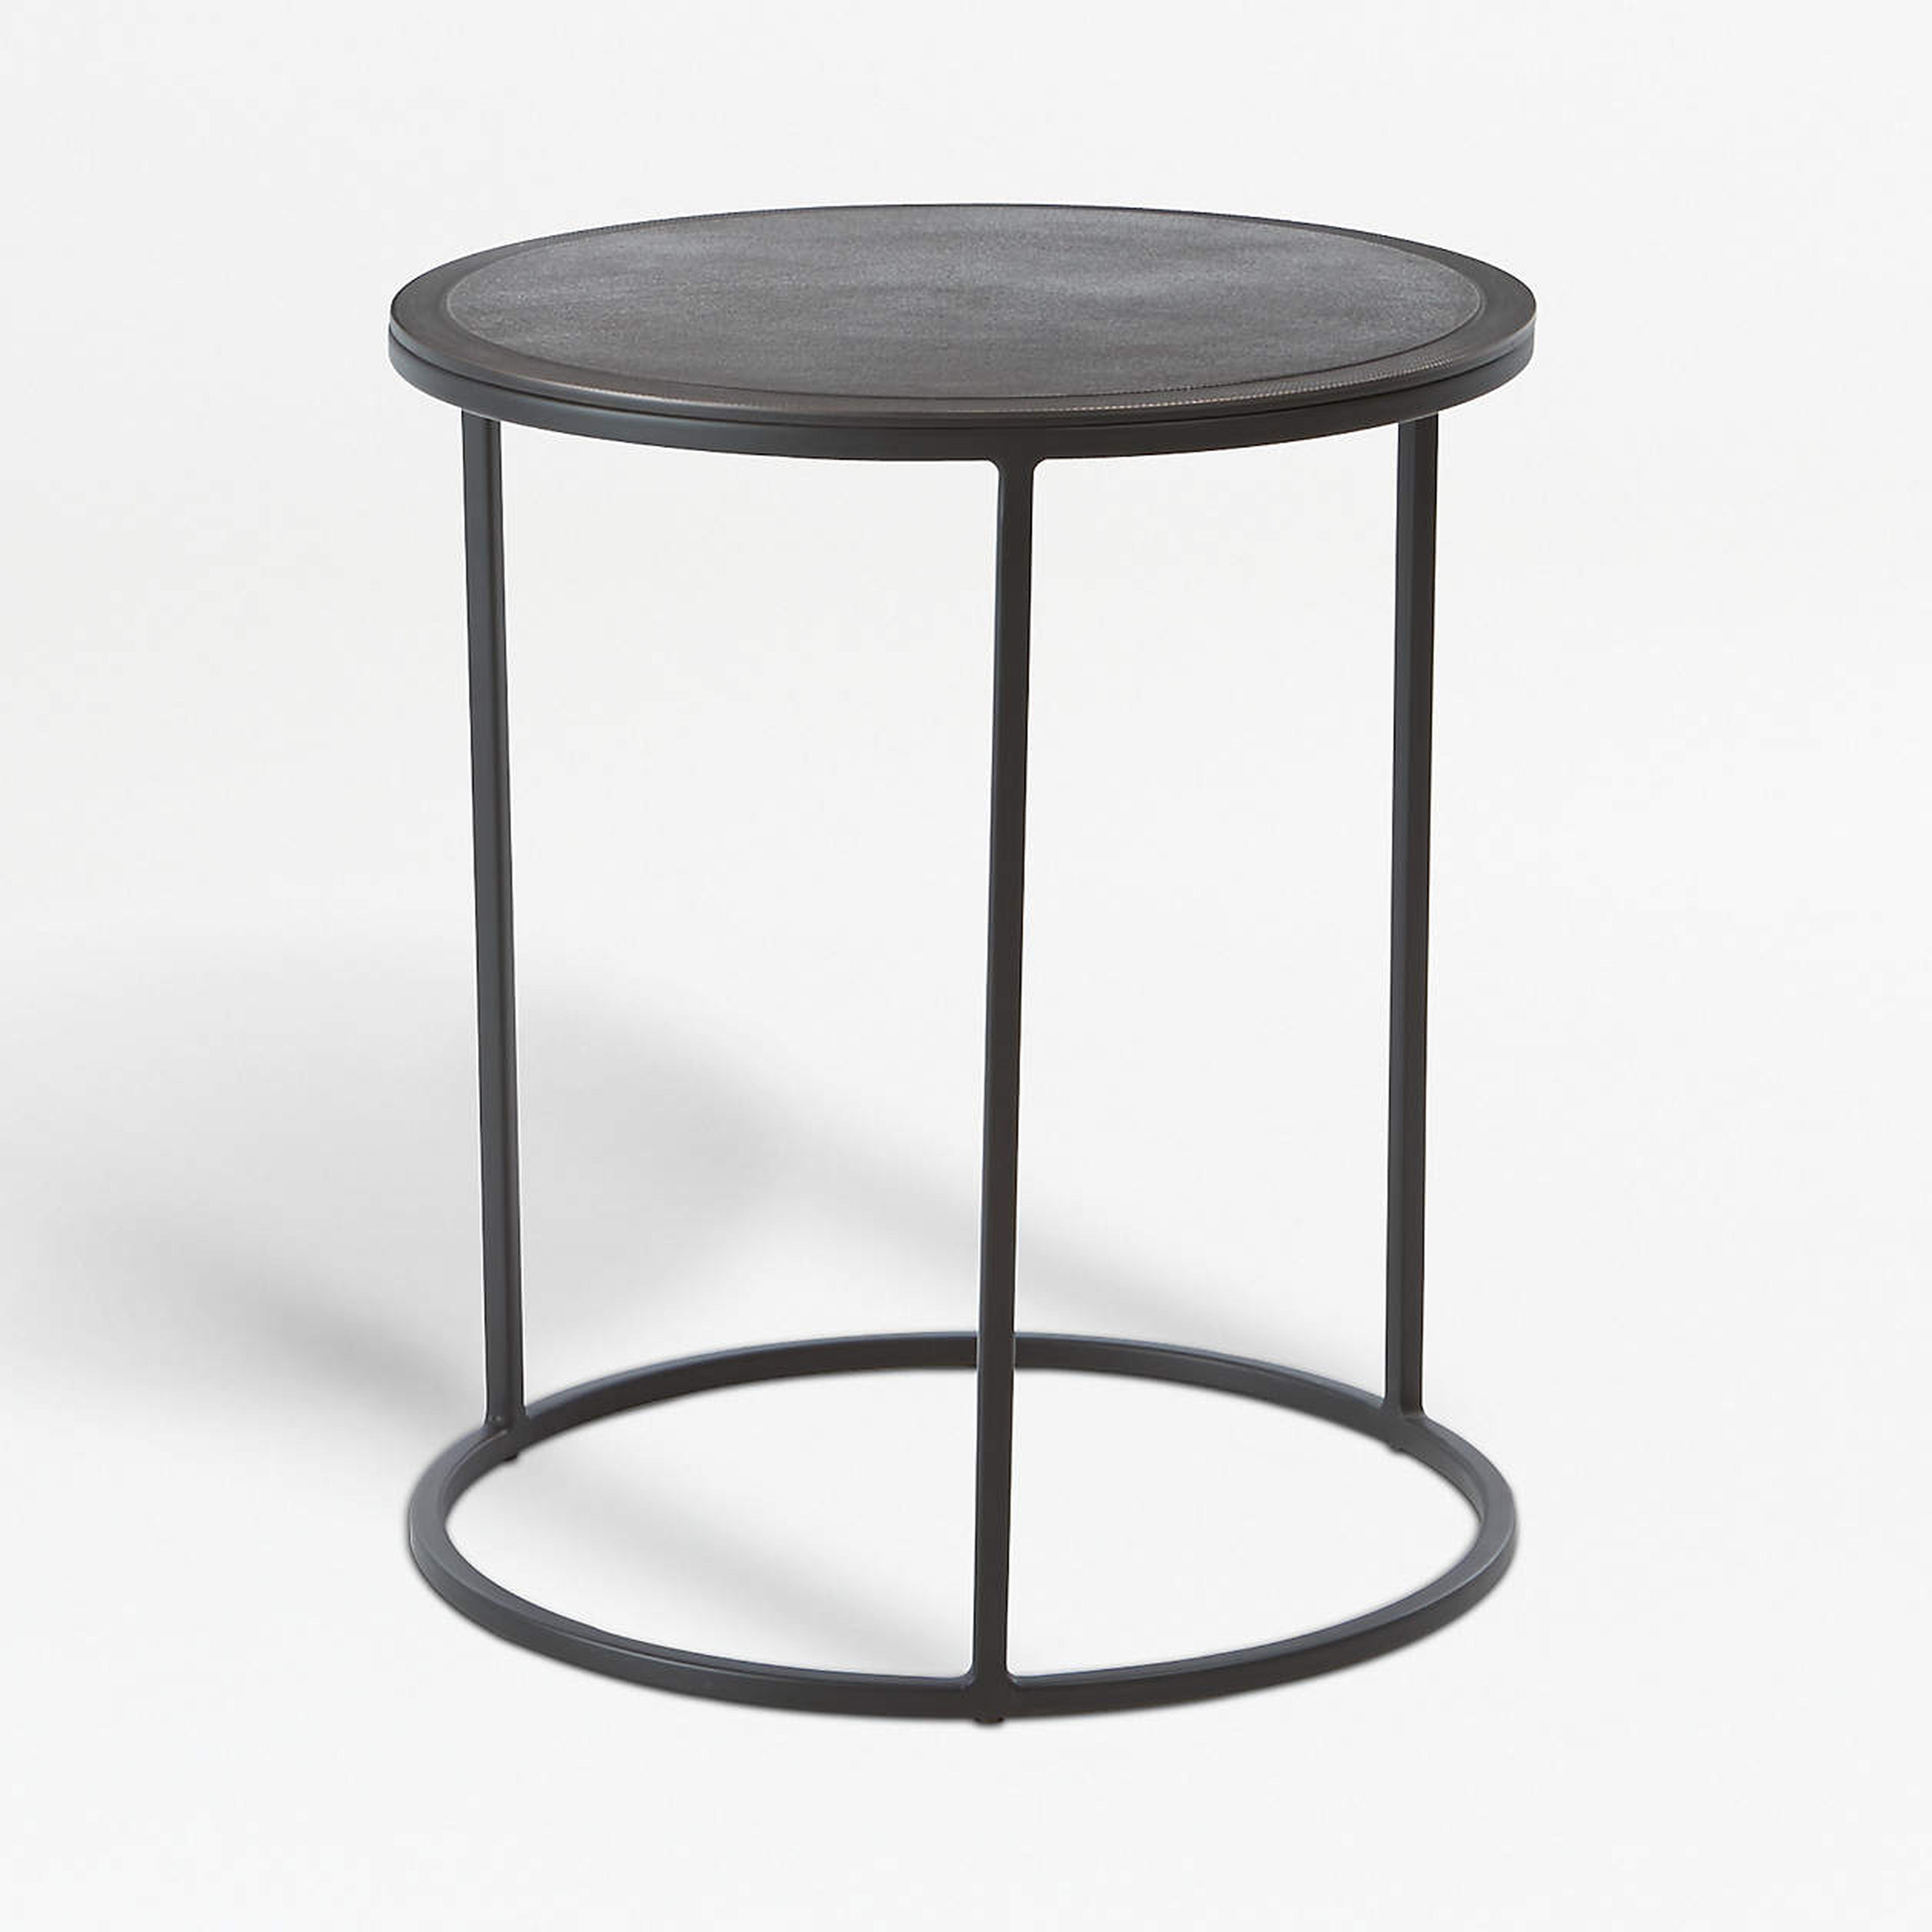 Knurl Small Round Accent Table - Crate and Barrel